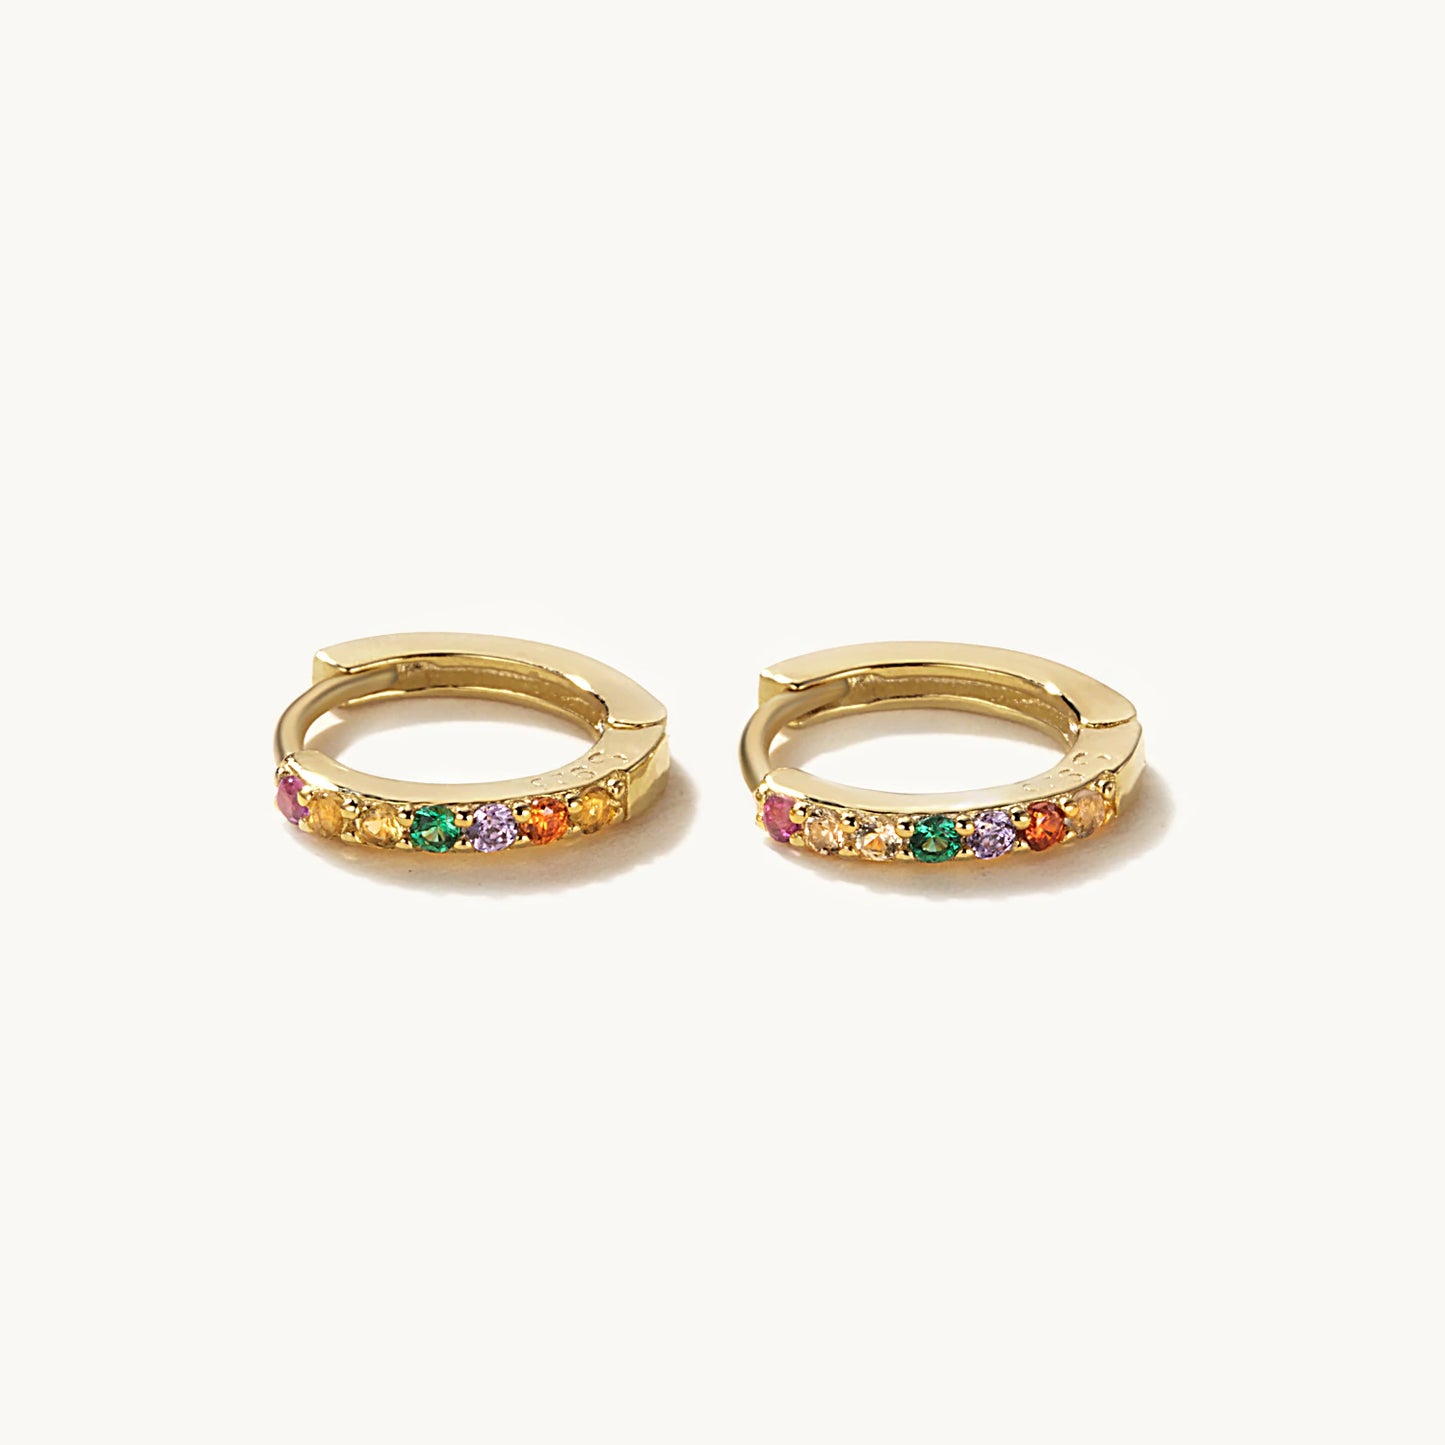 Baby Earrings:  14k Gold over Sterling Silver Huggie Hoops 3 Months to Age 5